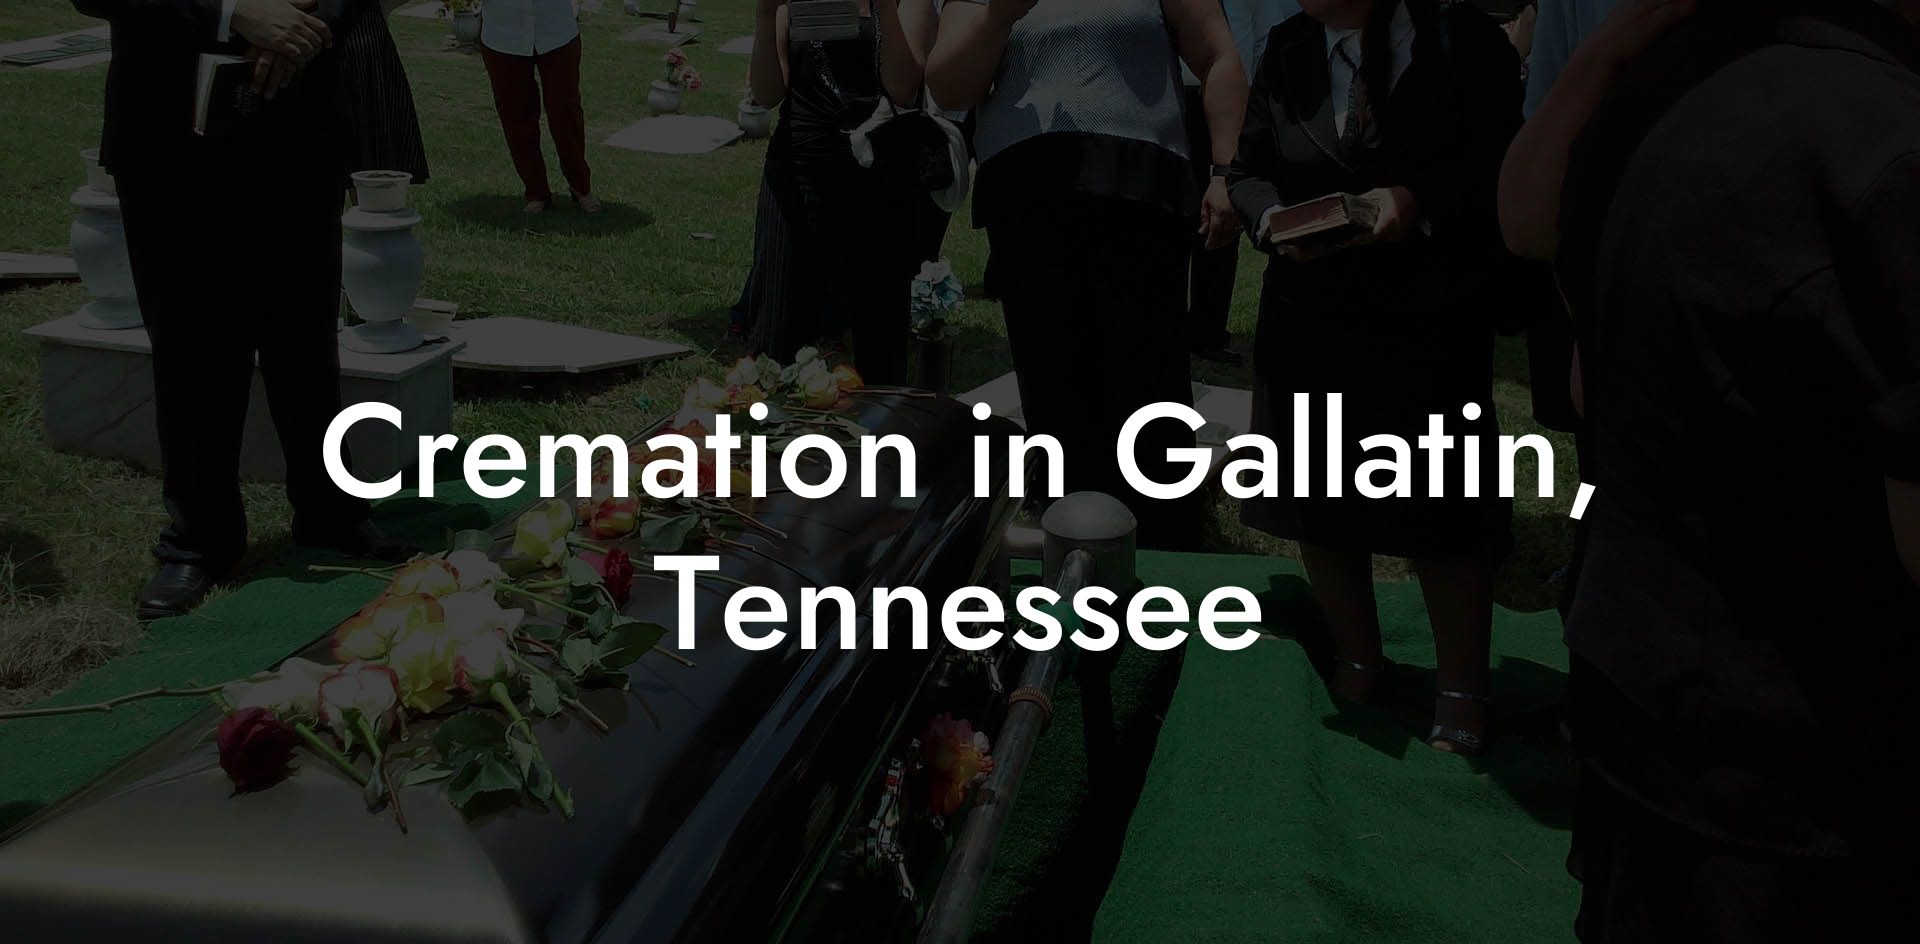 Cremation in Gallatin, Tennessee